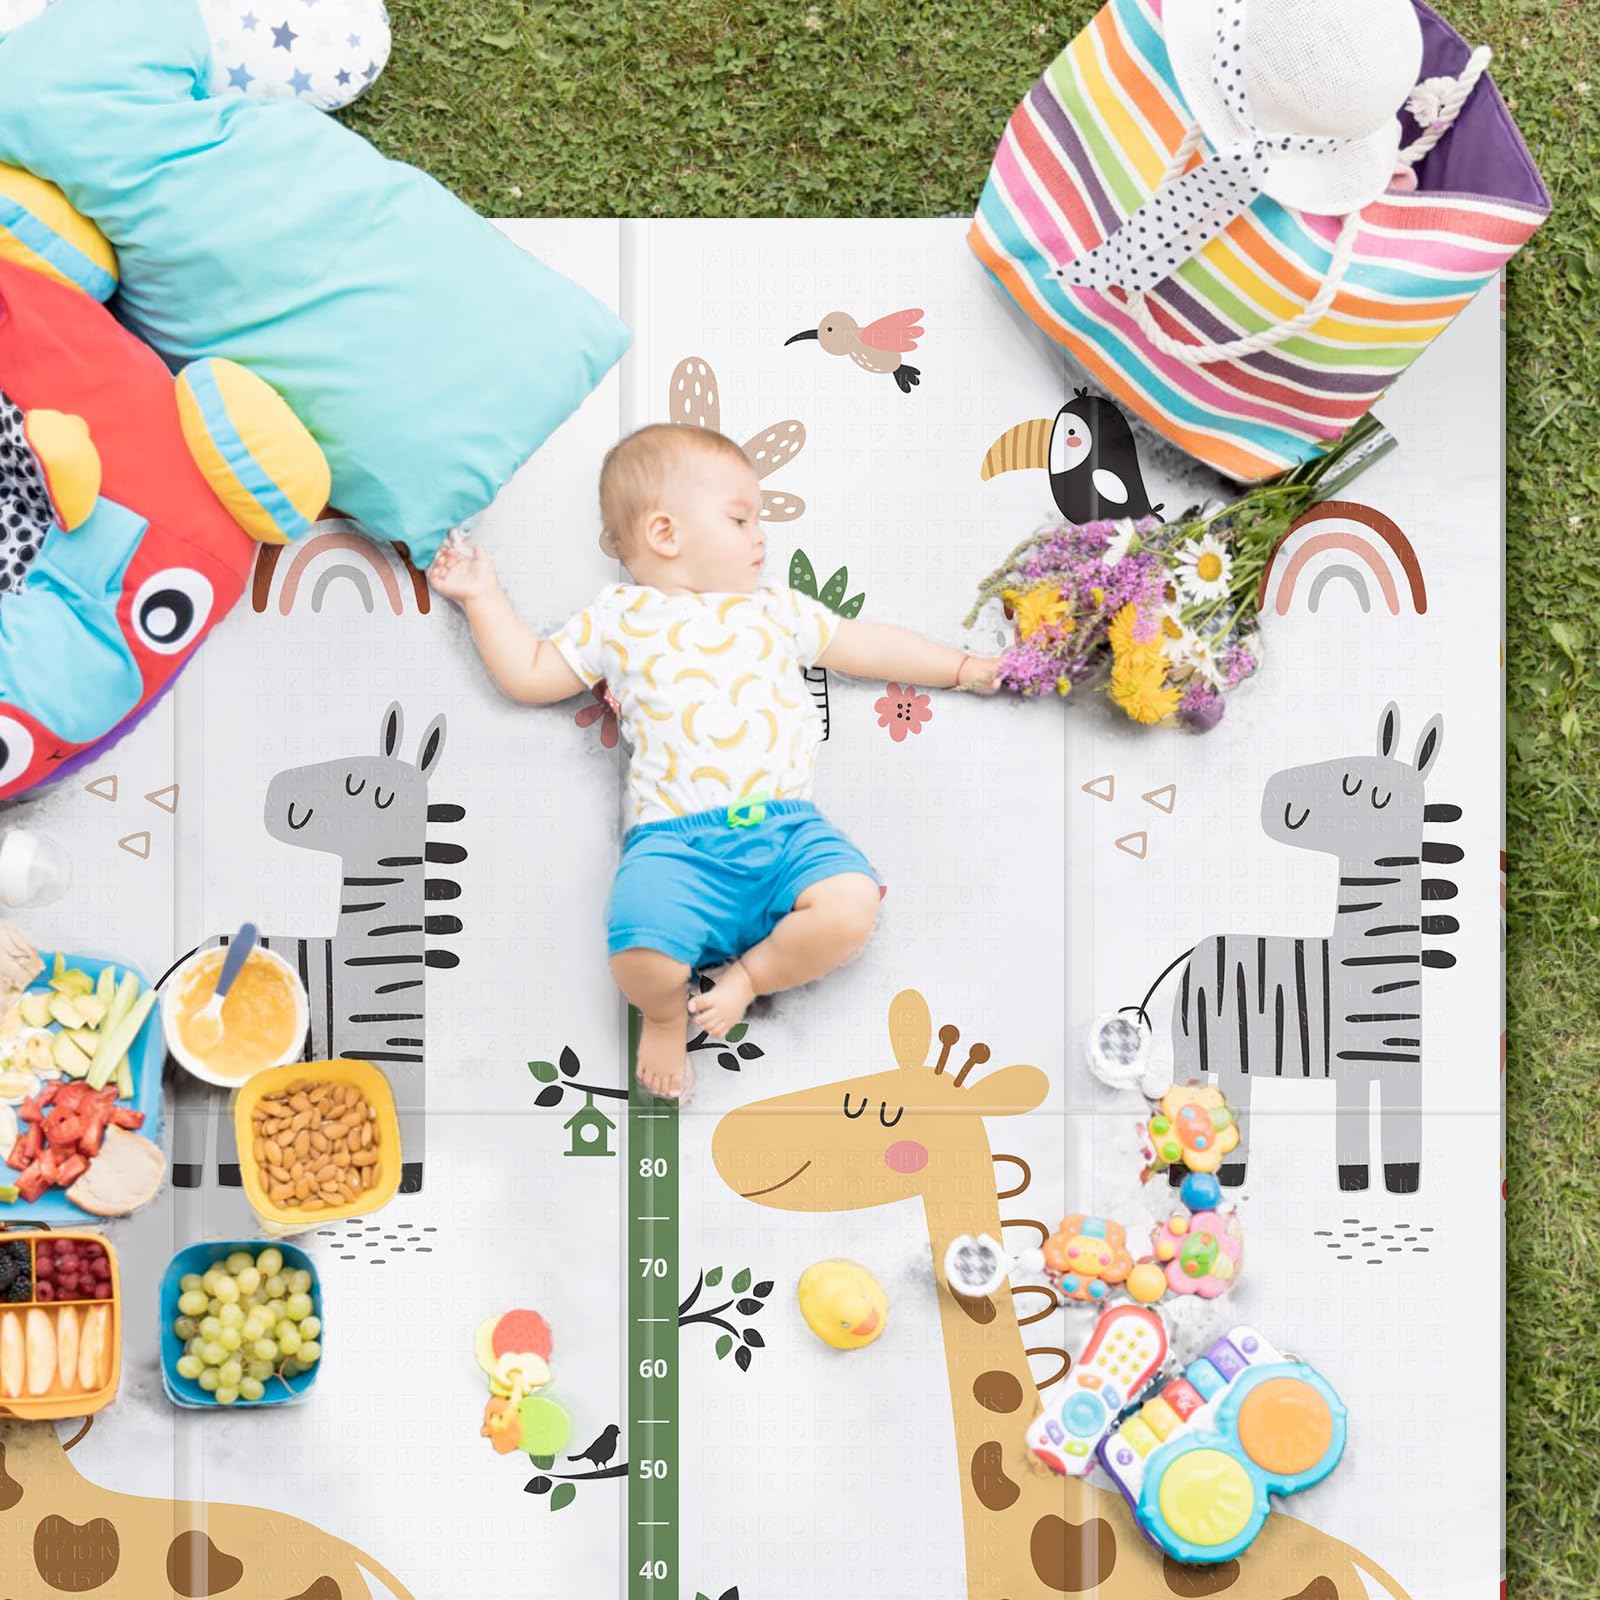 XL Baby Play Mat for Floor, PIGLOG 79